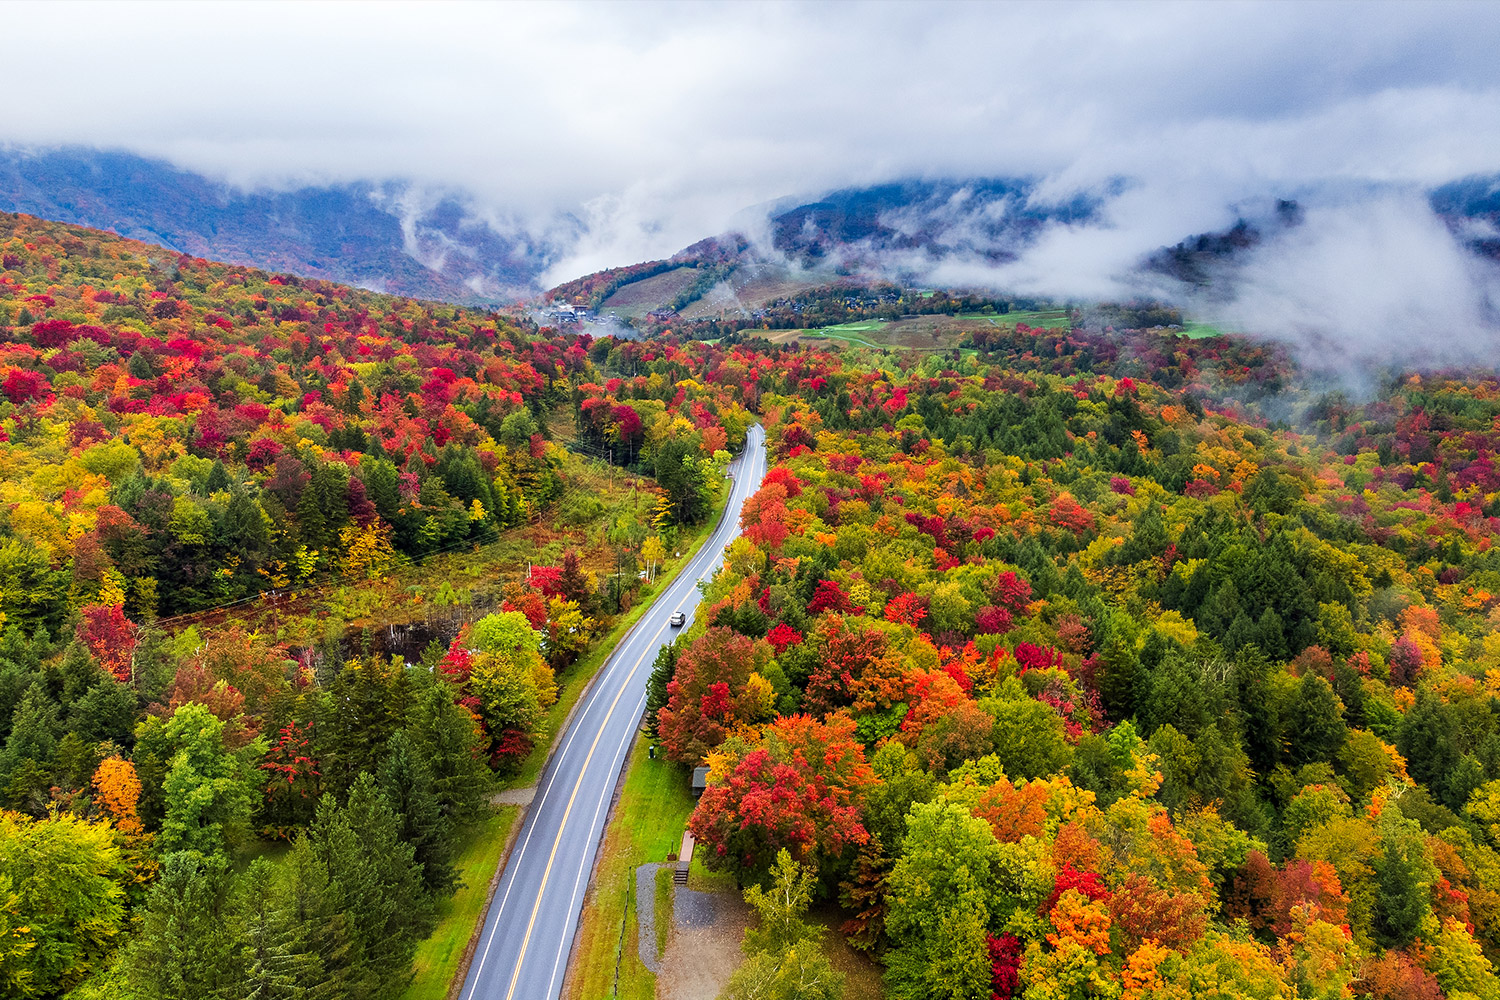 View from above road showing leaves starting to change deep red, orange, and yellow. Hills covered by clouds in back